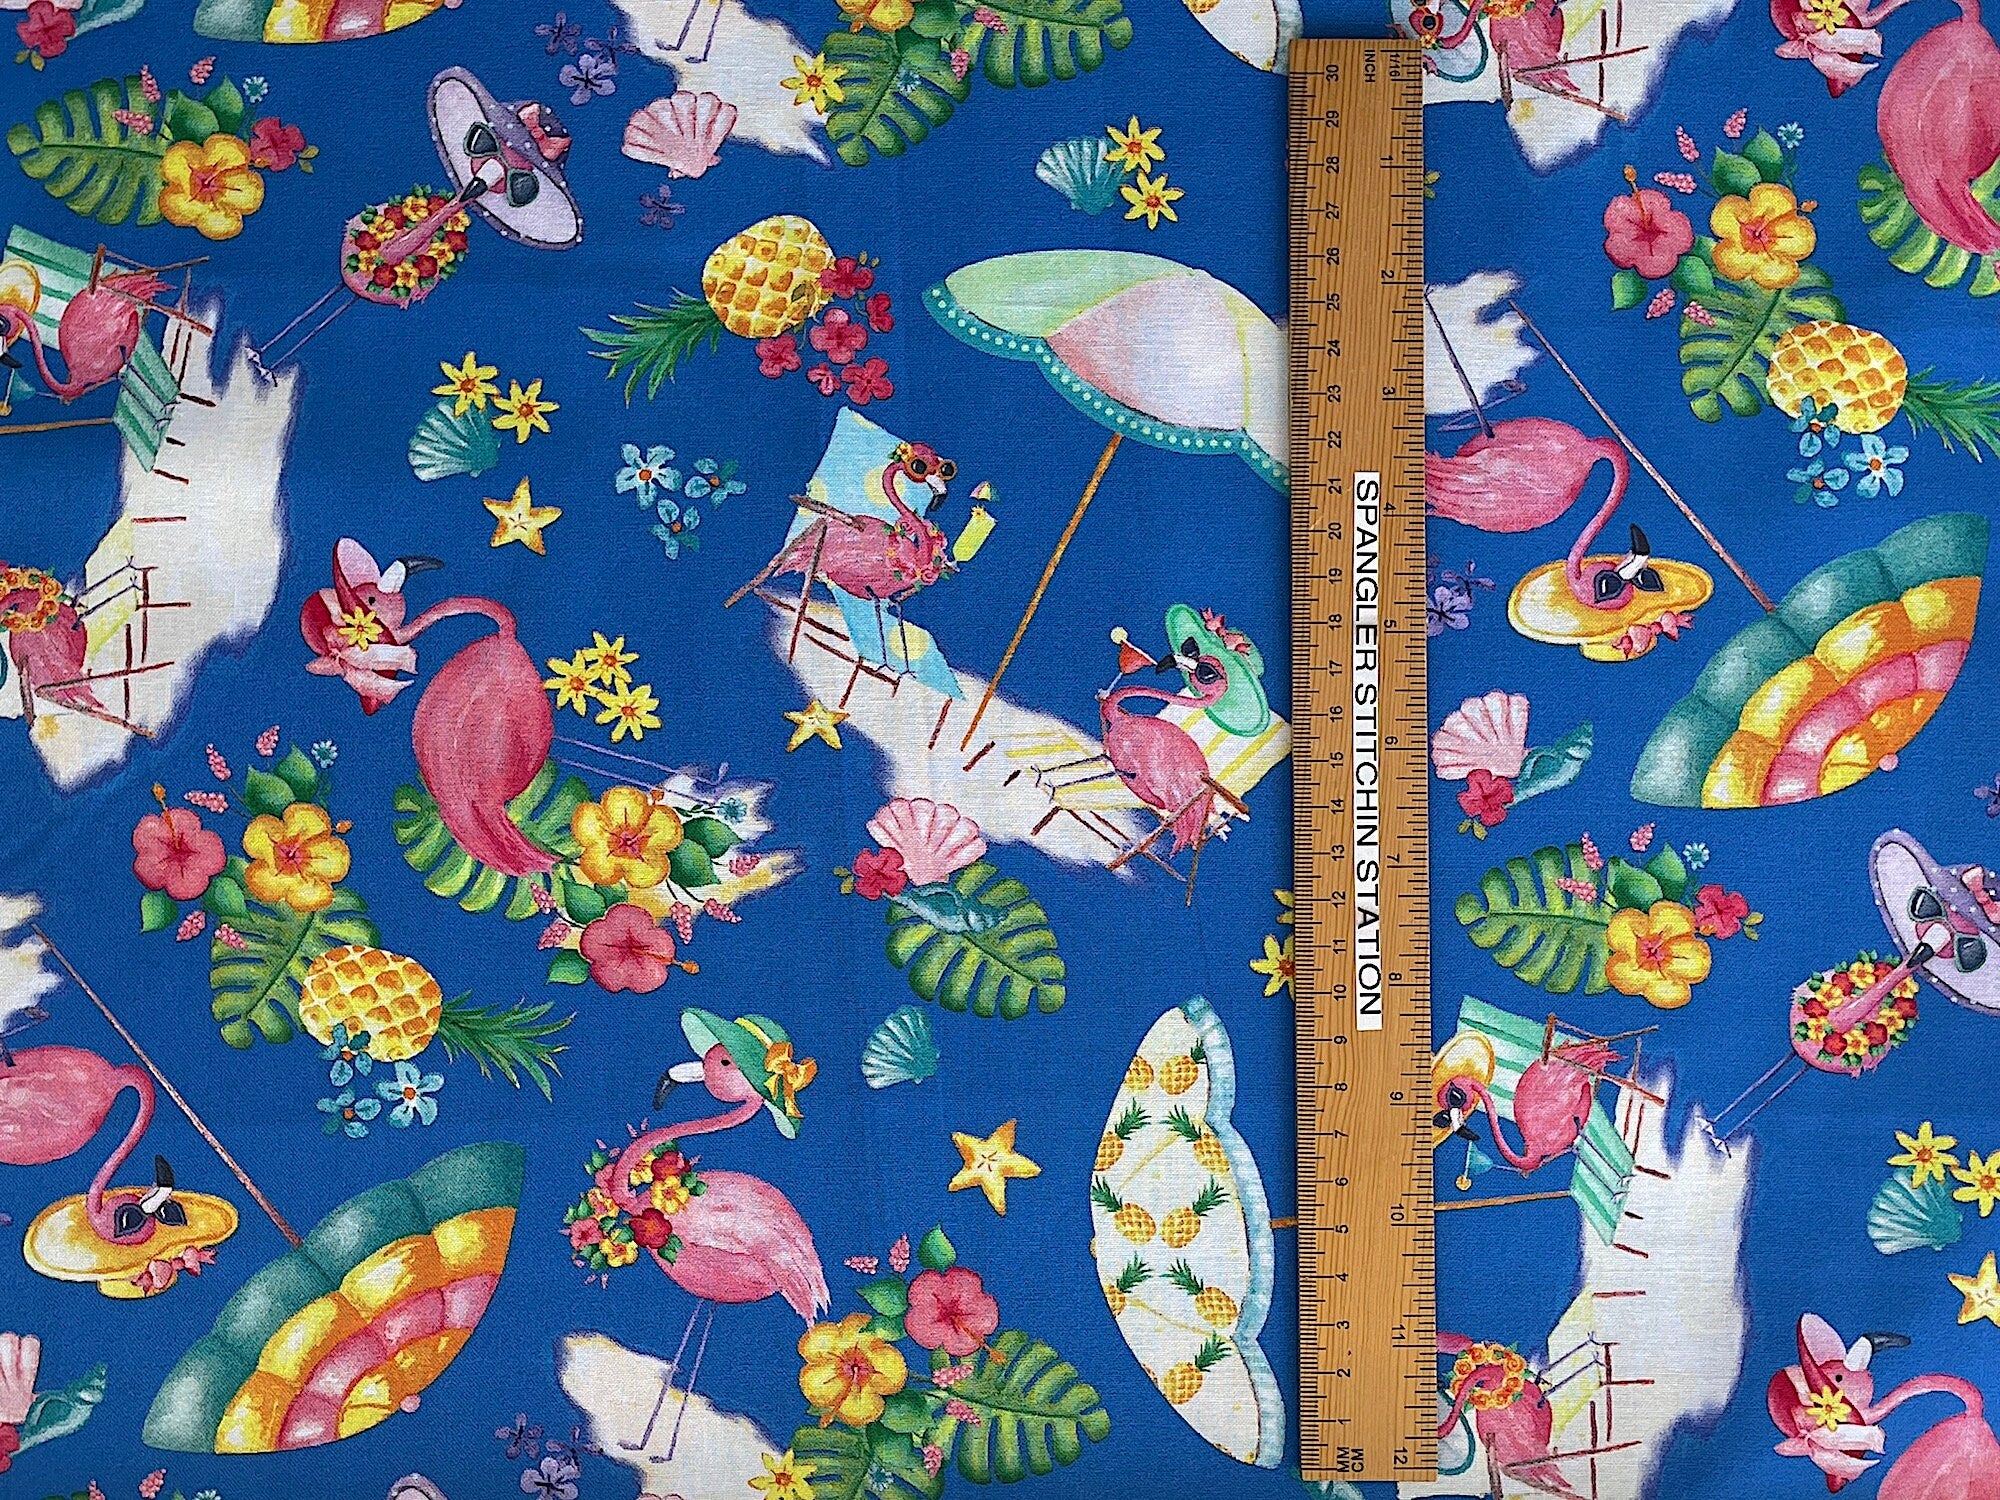 Ruler on fabric to show height.